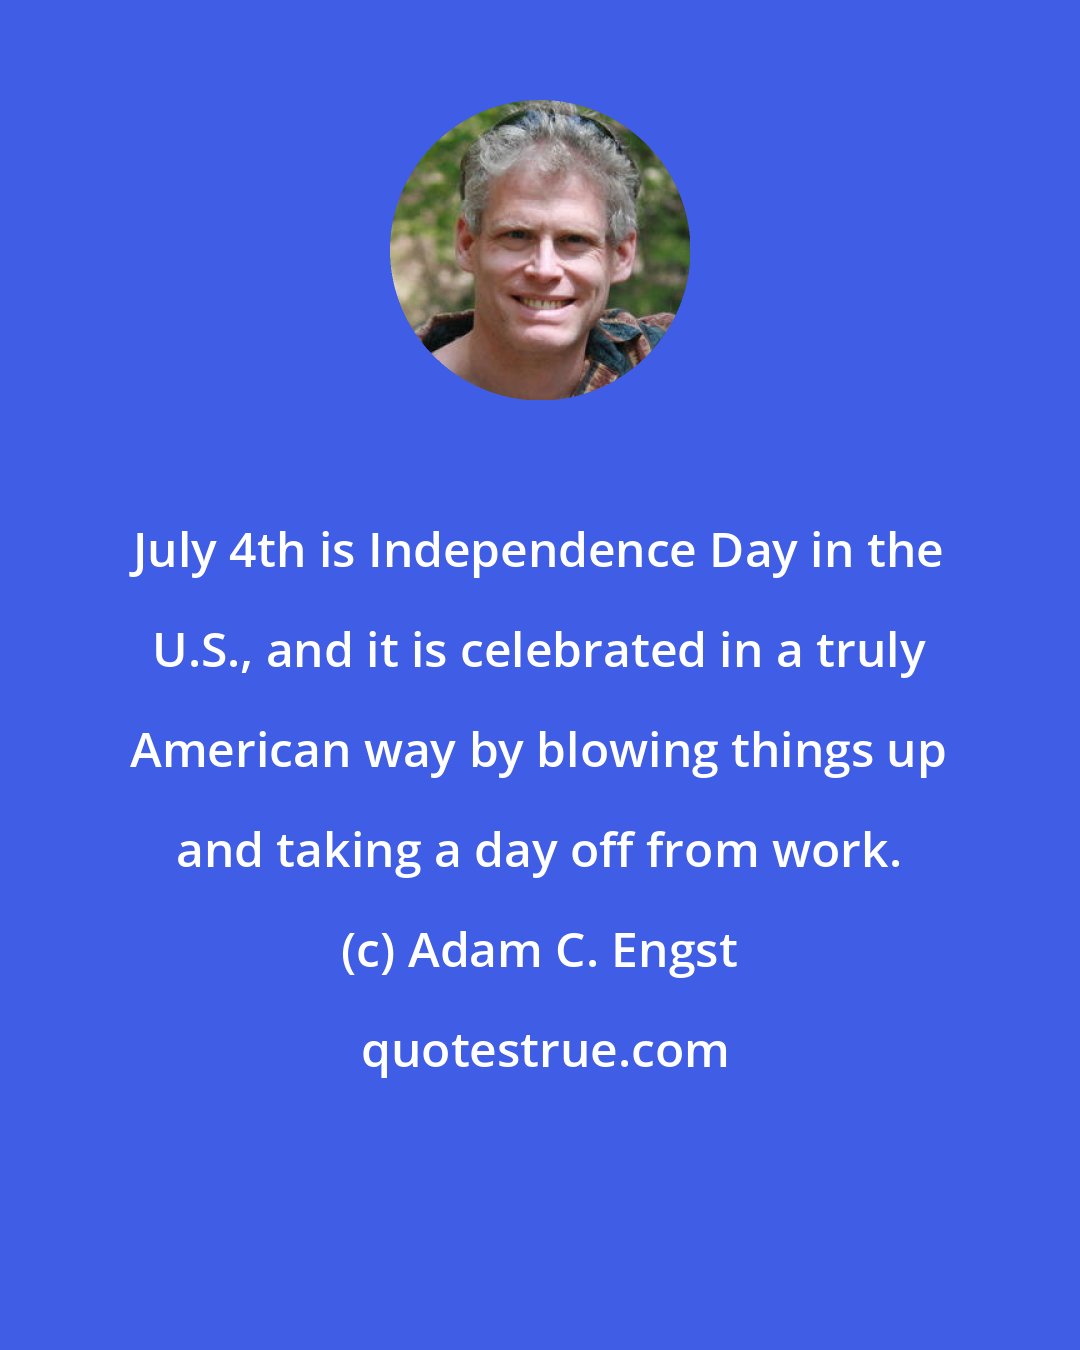 Adam C. Engst: July 4th is Independence Day in the U.S., and it is celebrated in a truly American way by blowing things up and taking a day off from work.